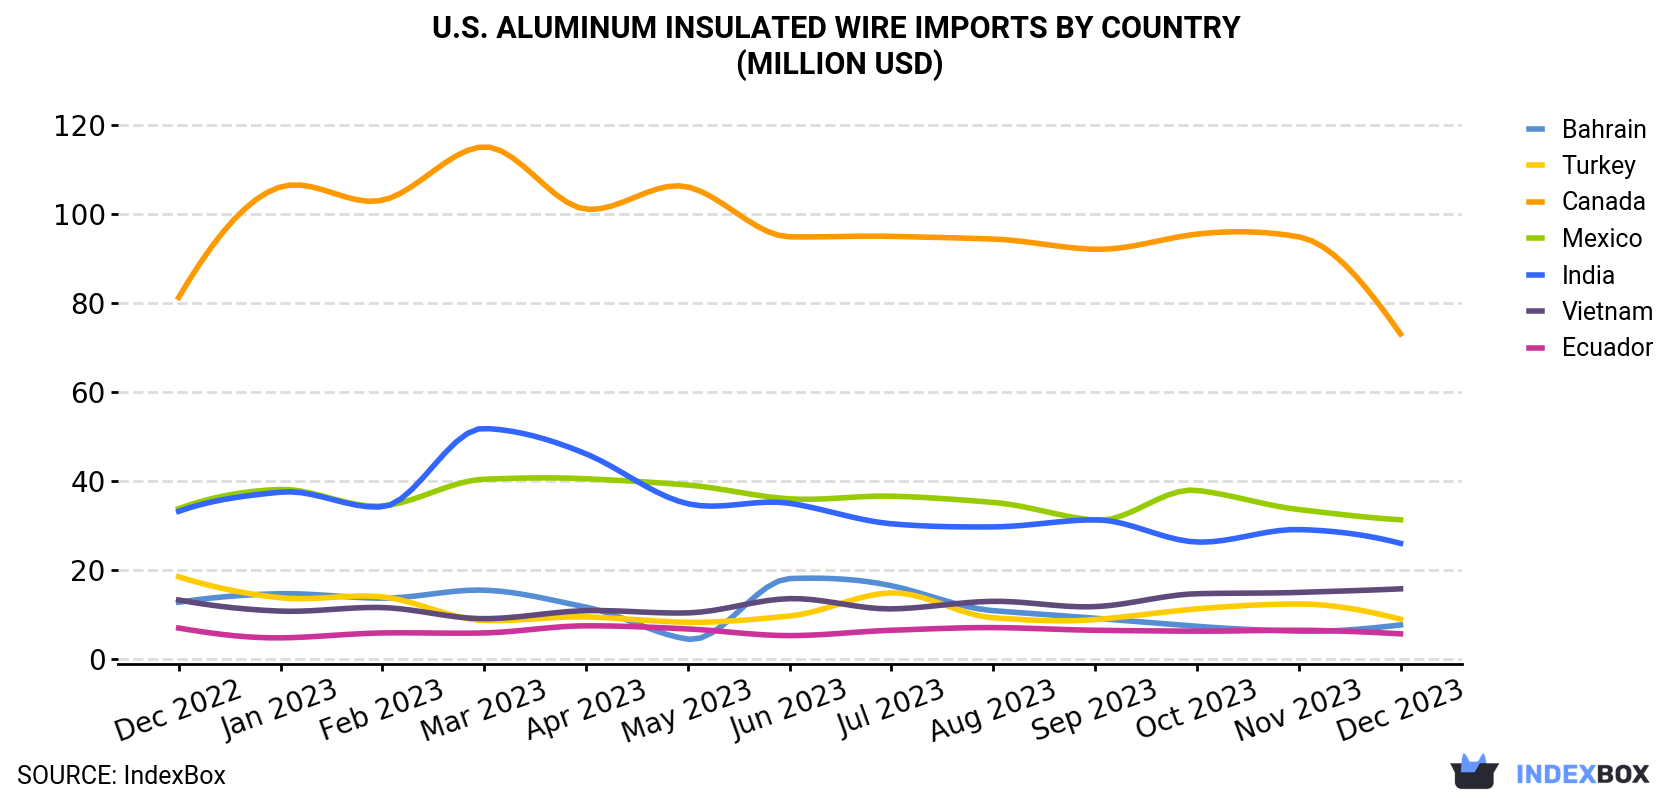 U.S. Aluminum Insulated Wire Imports By Country (Million USD)